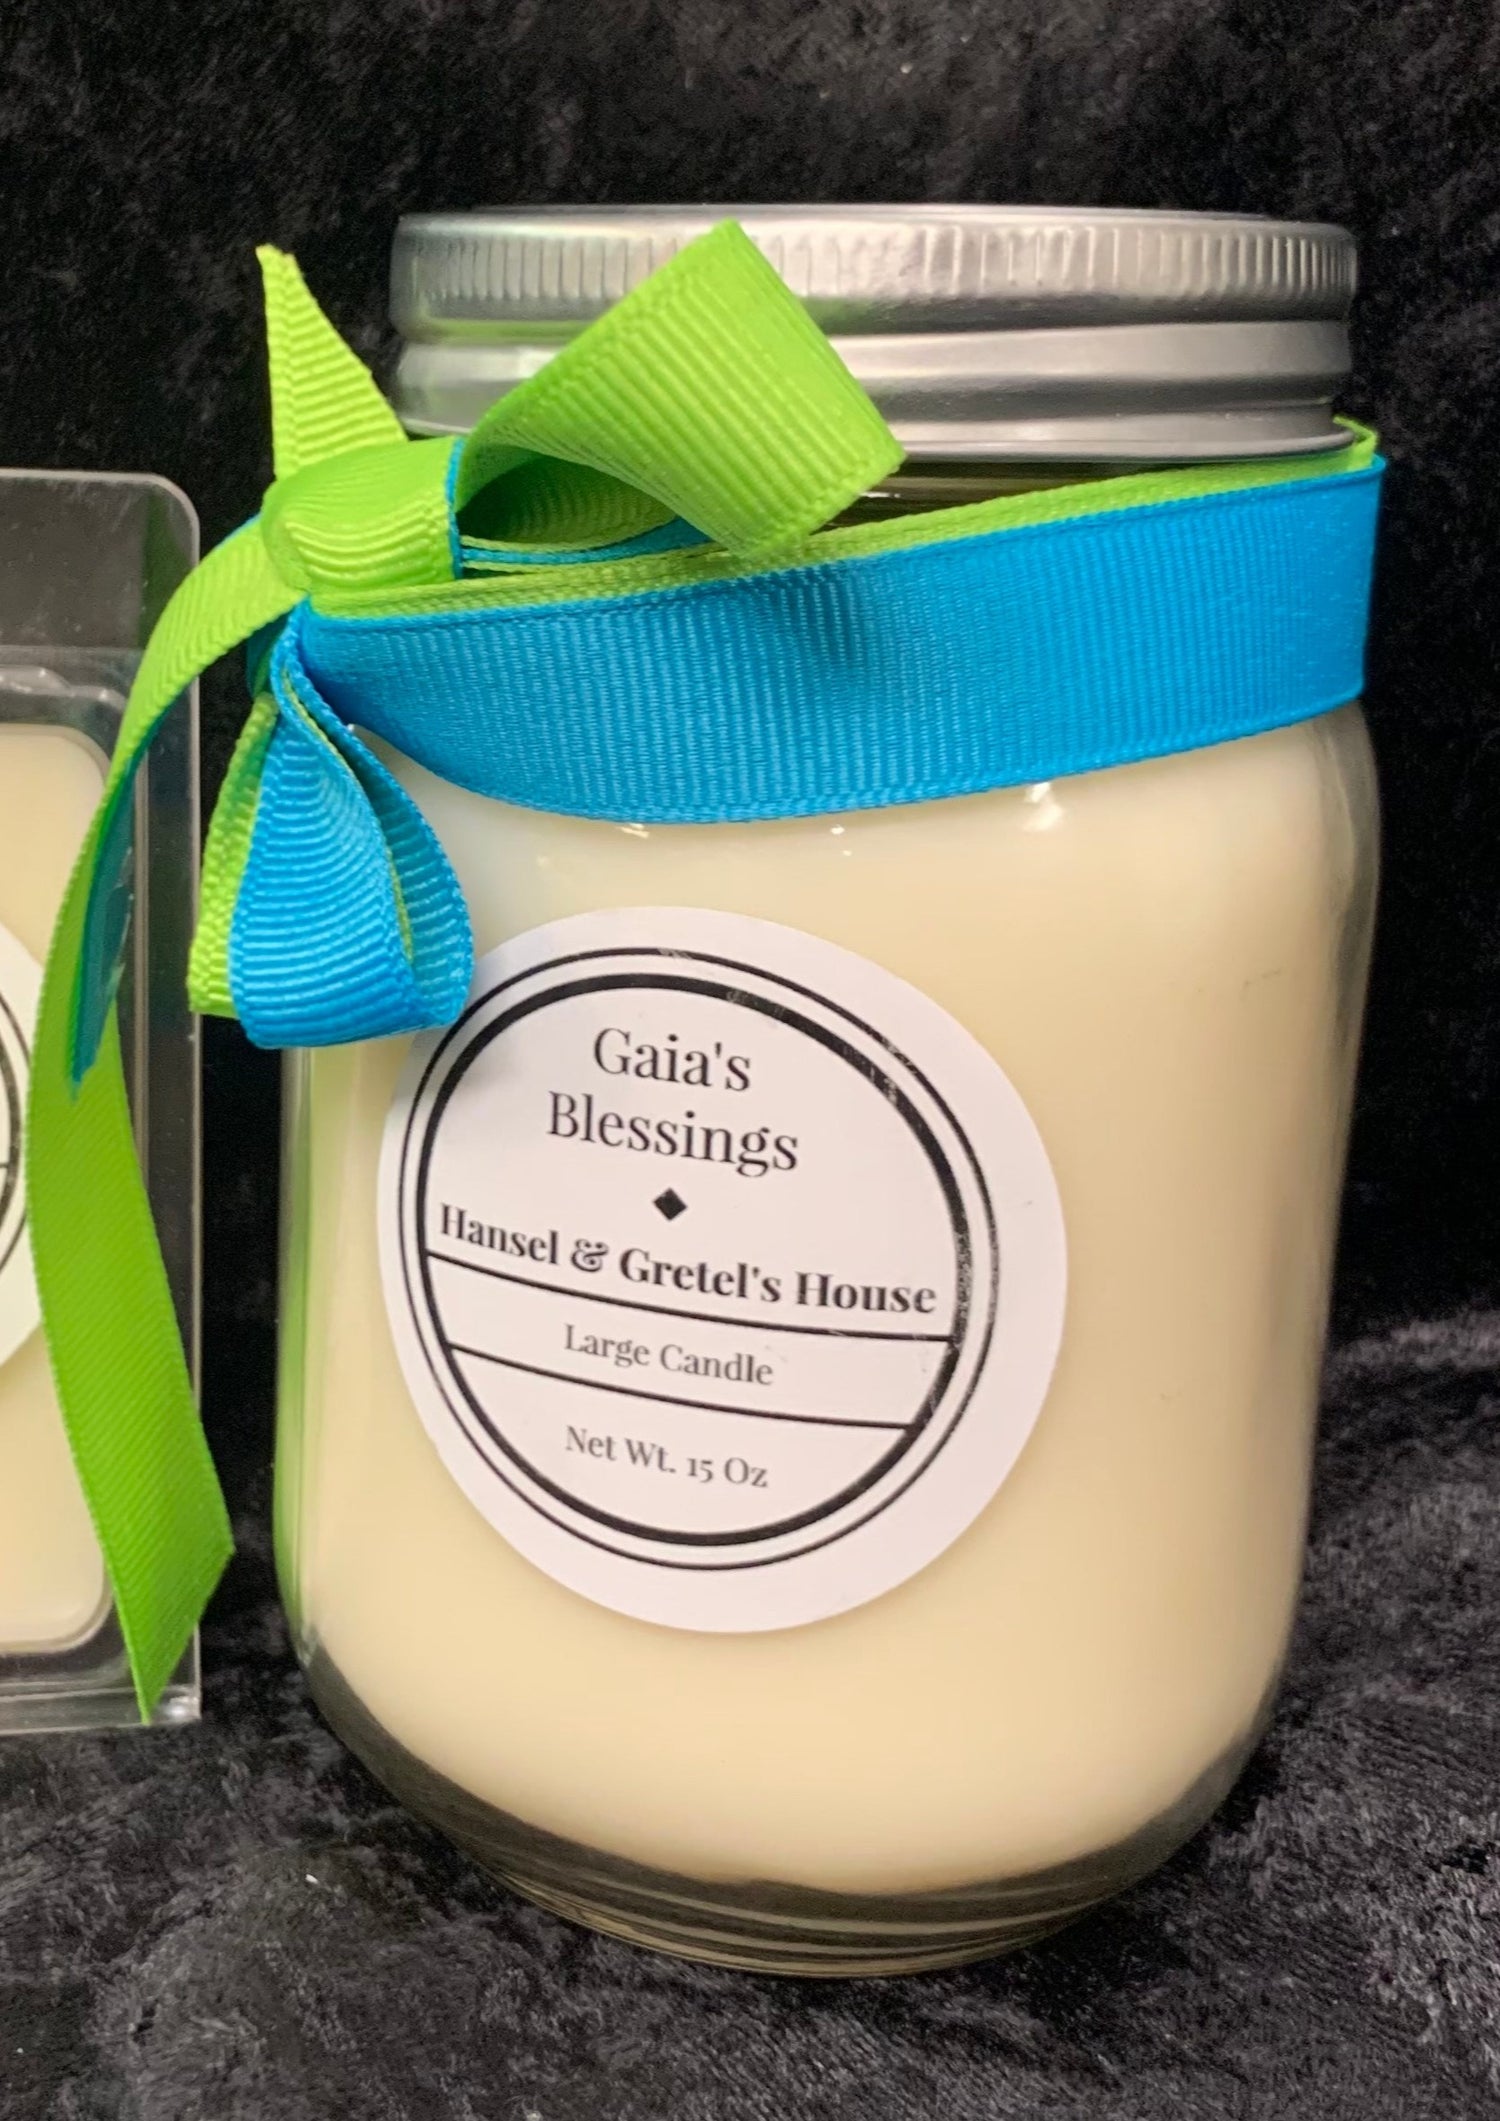 Hansel & Gretel's House fragrance eco-friendly blended wax candle